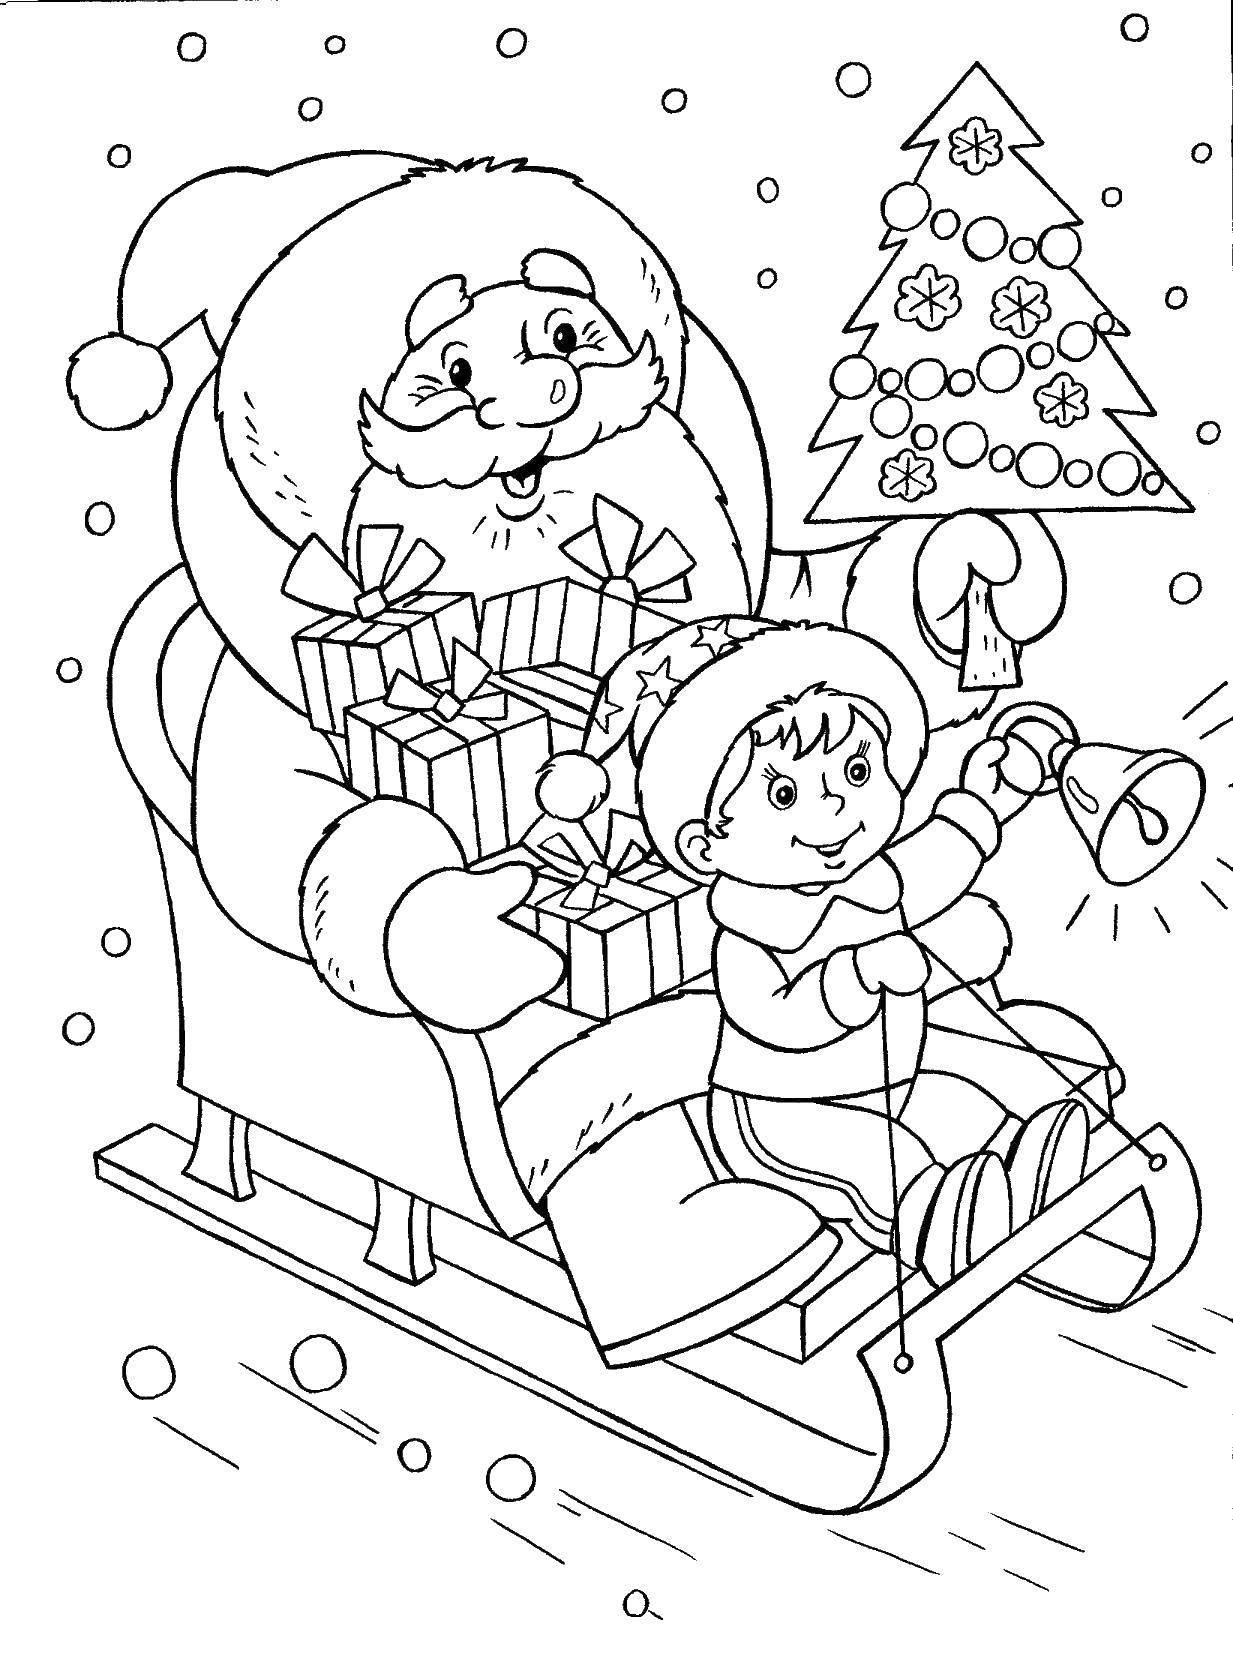 Coloring Santa Claus and boy. Category The characters from fairy tales. Tags:  Santa Claus, sleigh, boy.